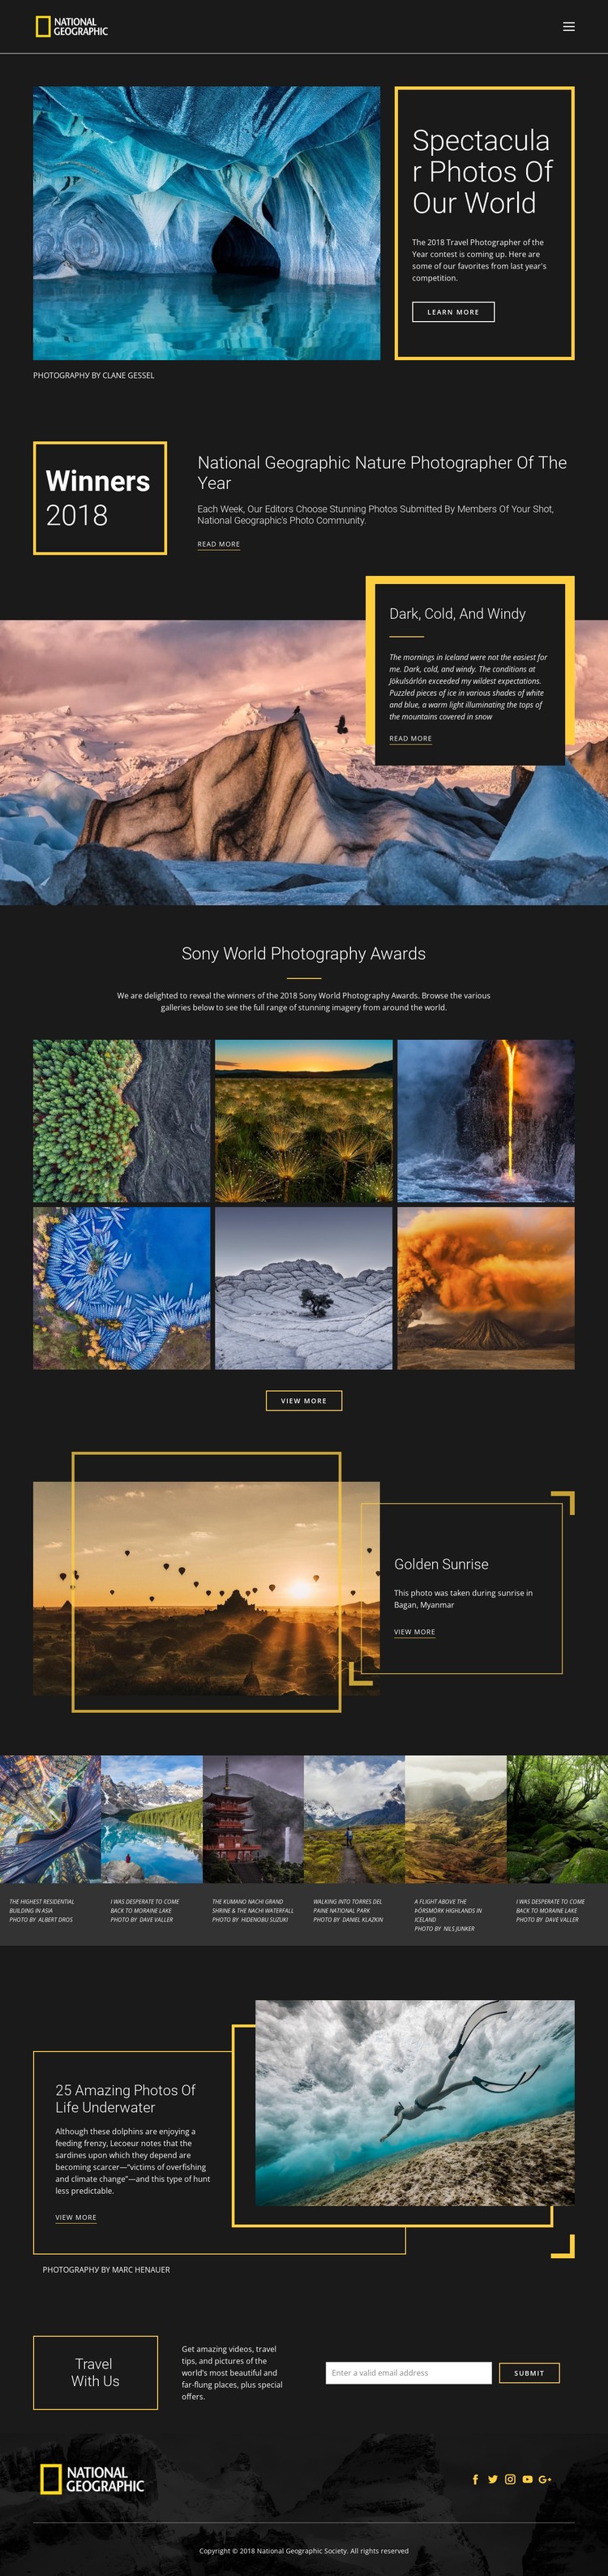 Pictures of nature CSS Template